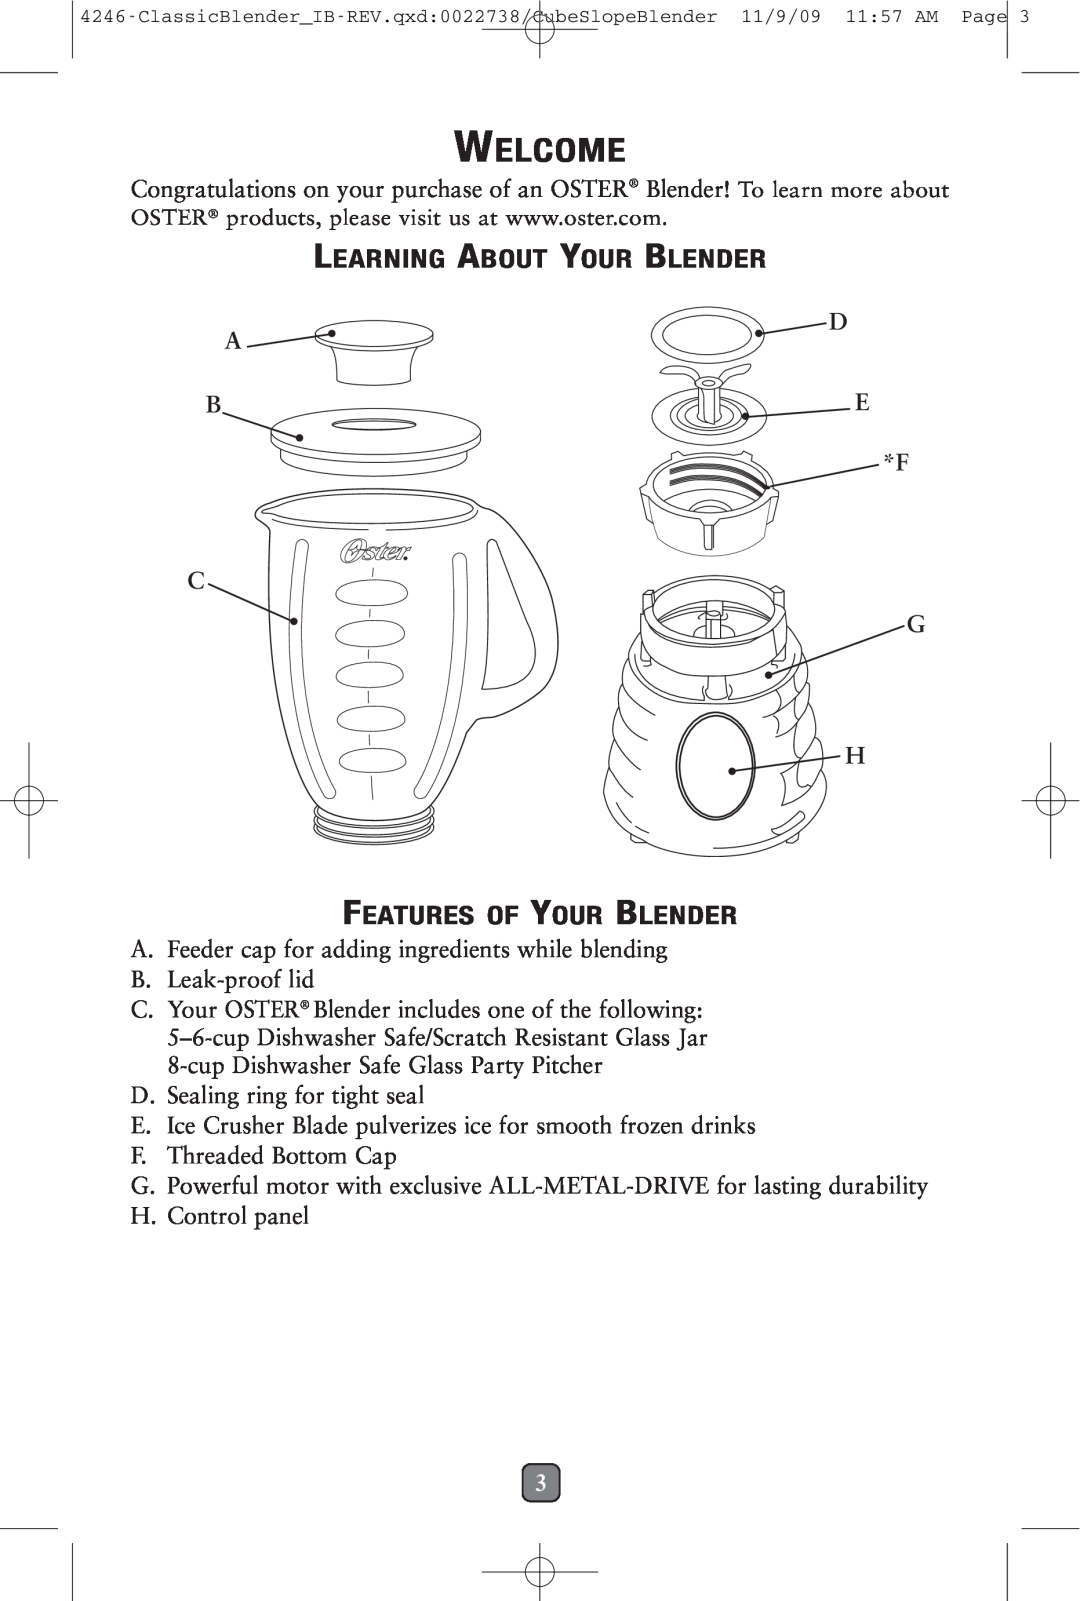 Oster 114279-009 manual Welcome, Learning About Your Blender, Features Of Your Blender, D A Be F C G H 